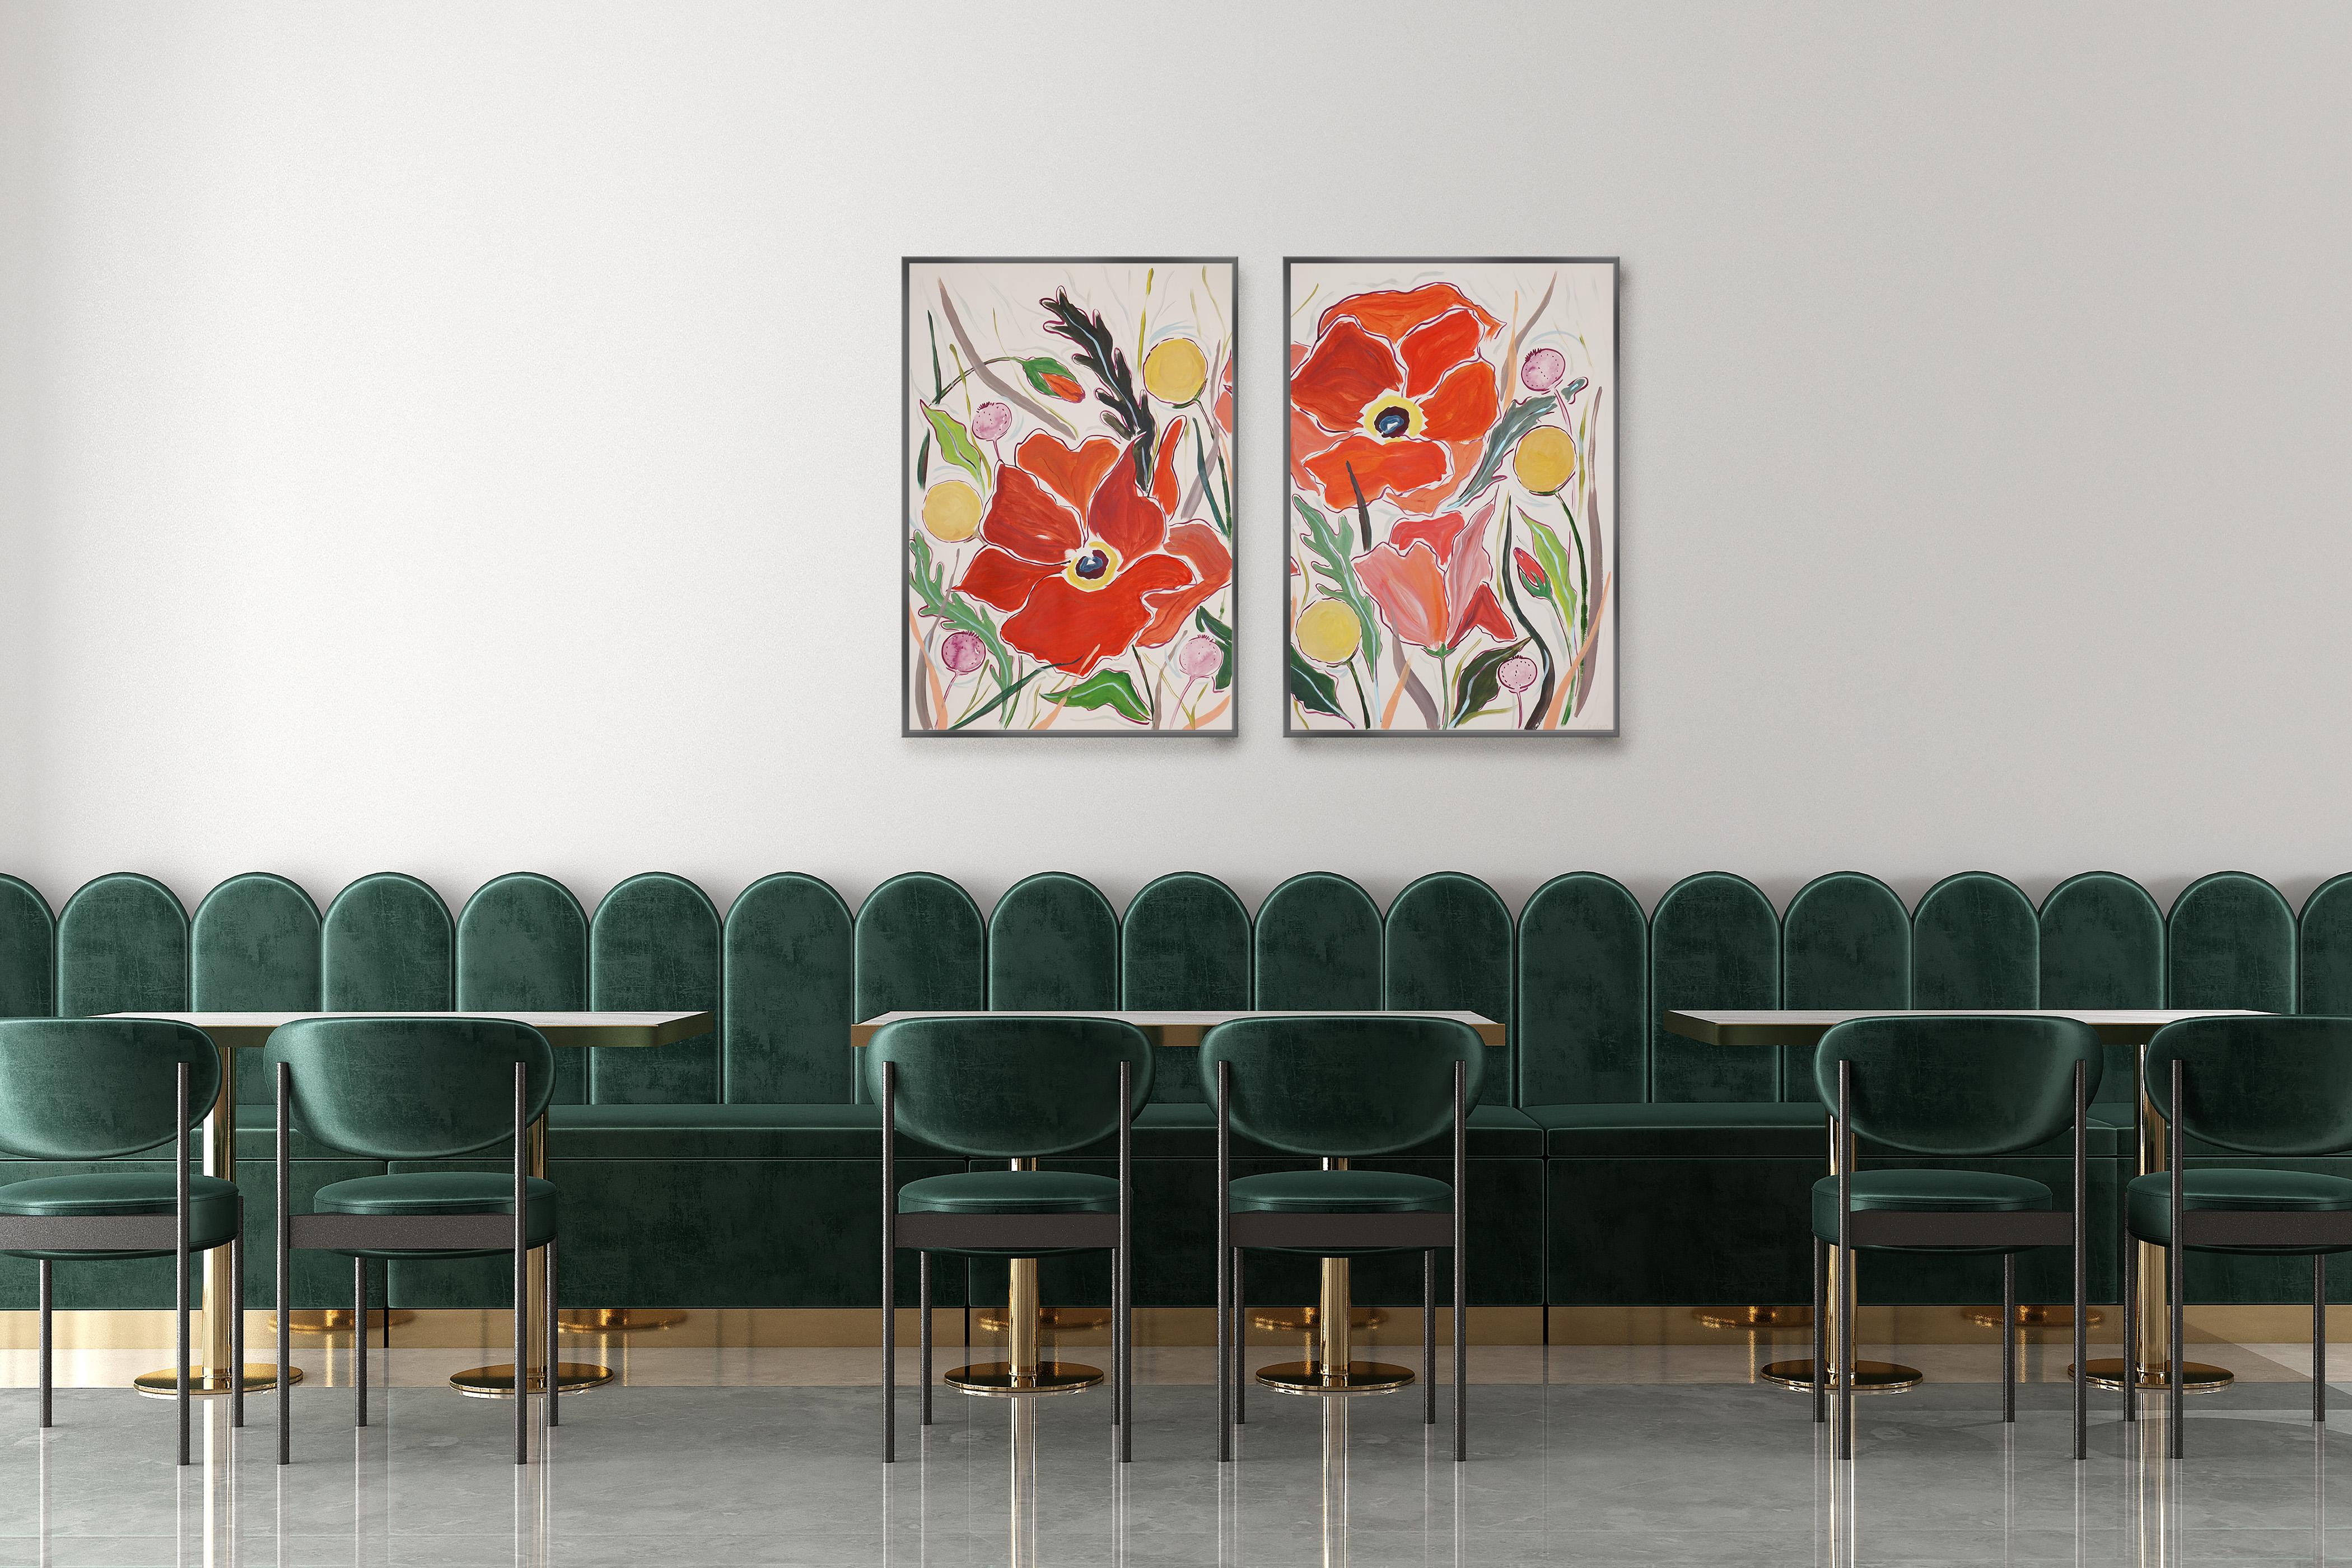 Large Red Poppy Flowers Diptych with Yellow Wild Craspedia Bloom, Illustration  For Sale 1